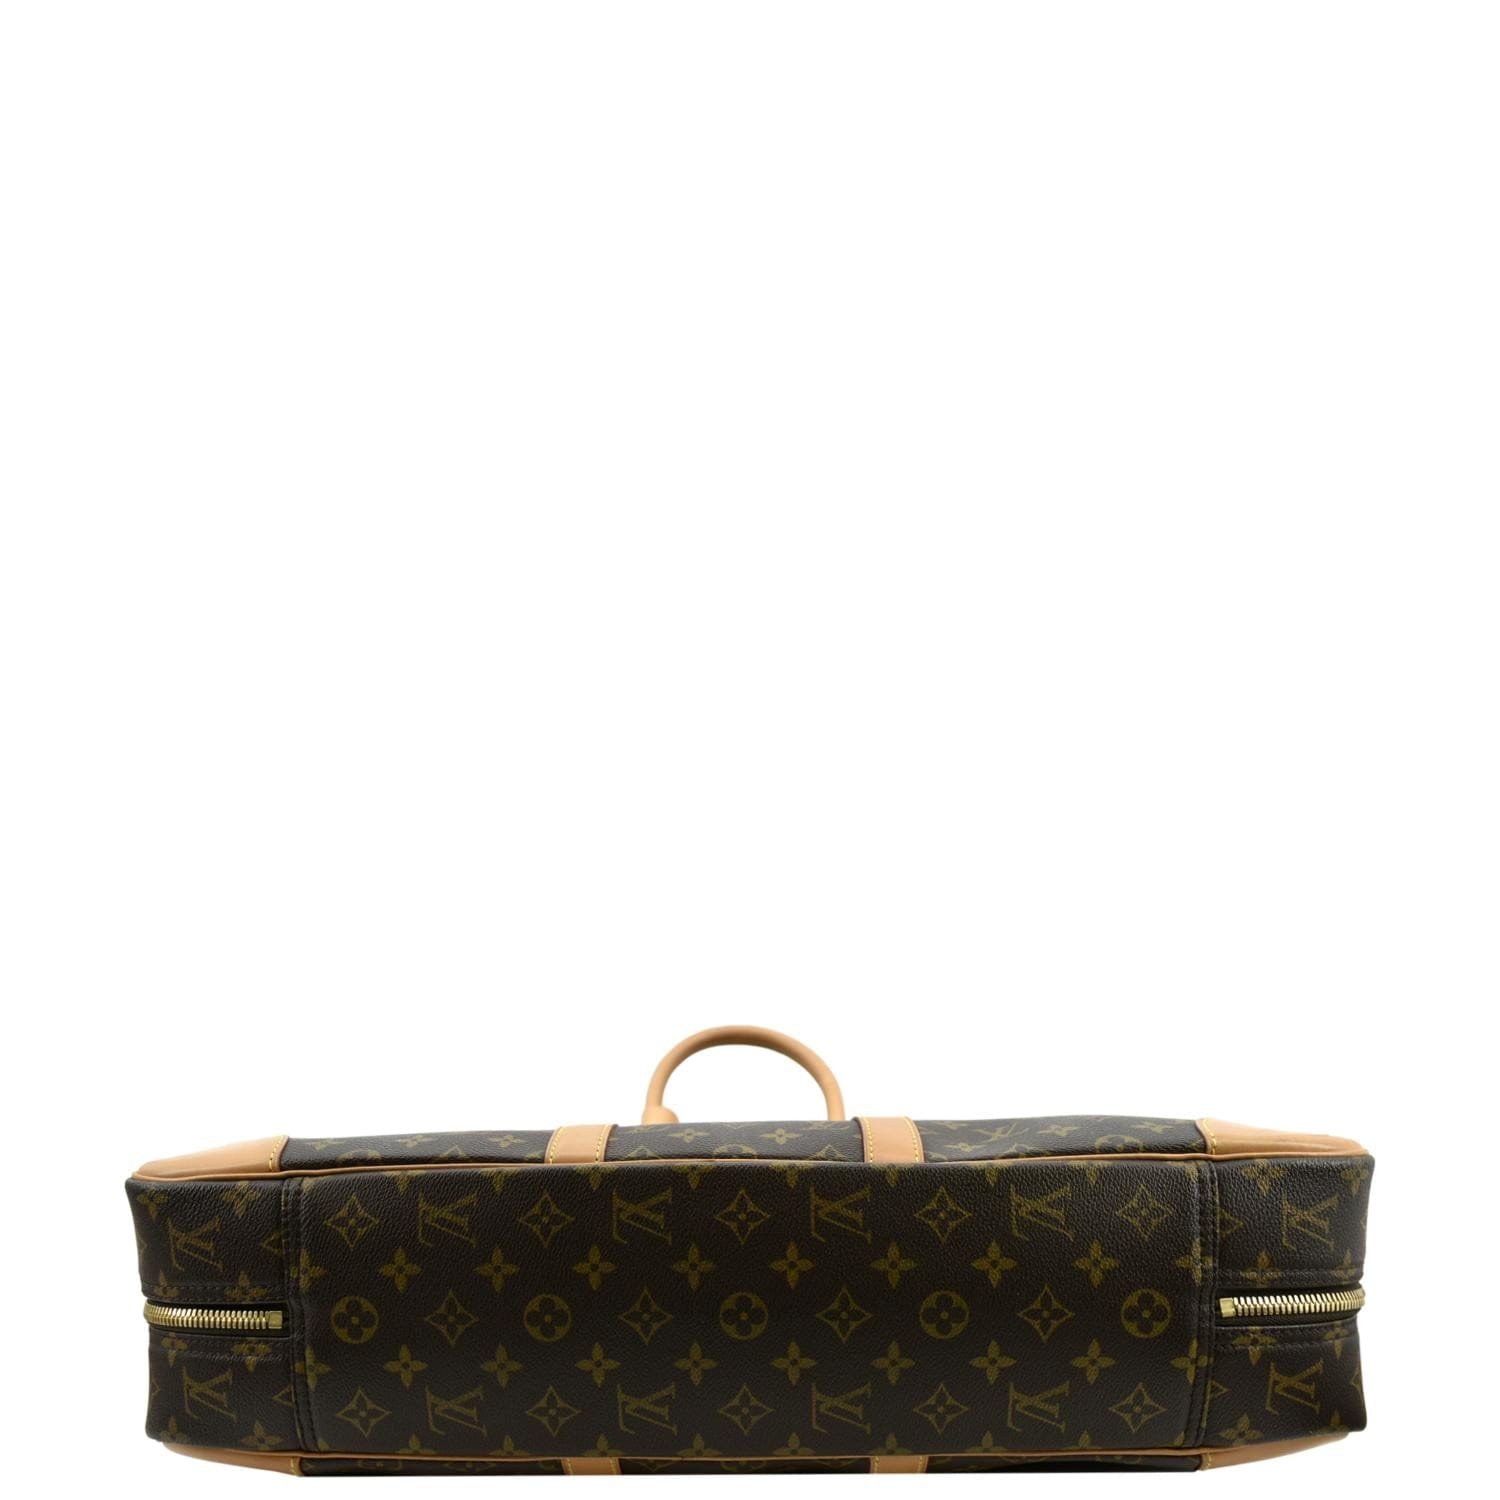 LOUIS VUITTON Sirius 45 Carry On Over Night Travel Bag For Sale at